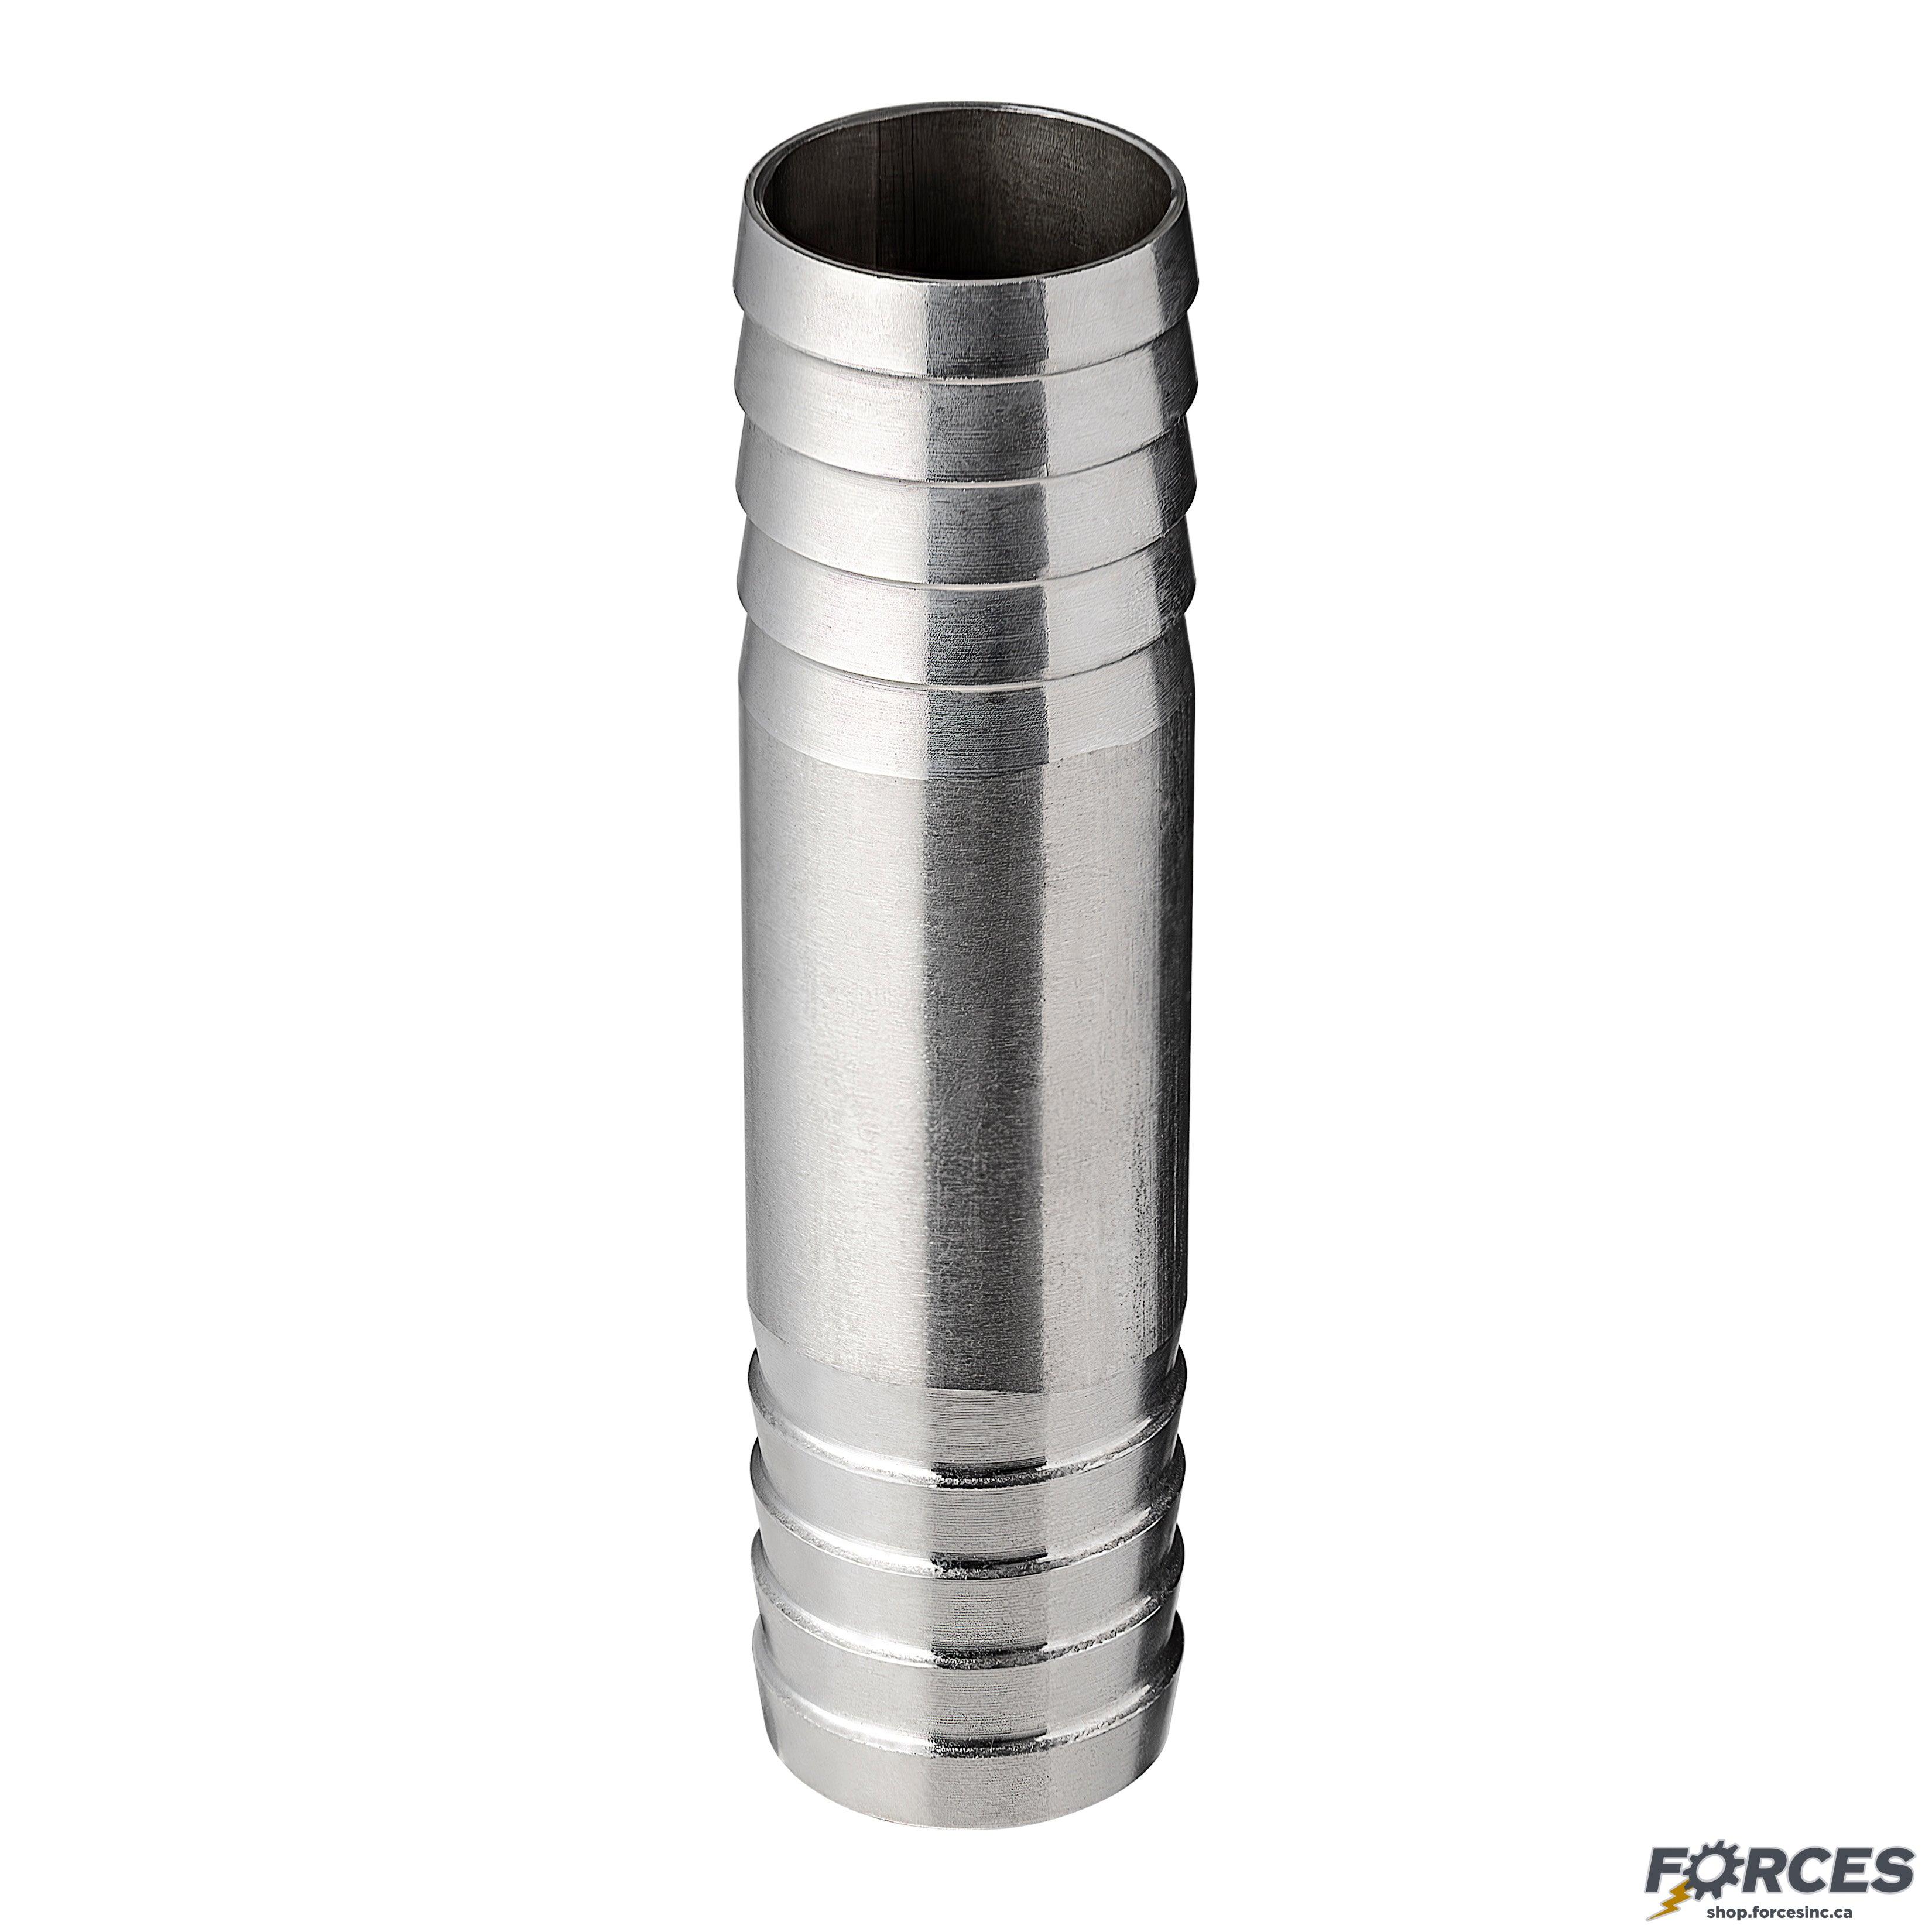 Union Hose Coupling 1-1/4" x 1-1/4" Hose Barb - Stainless Steel 304 - Forces Inc